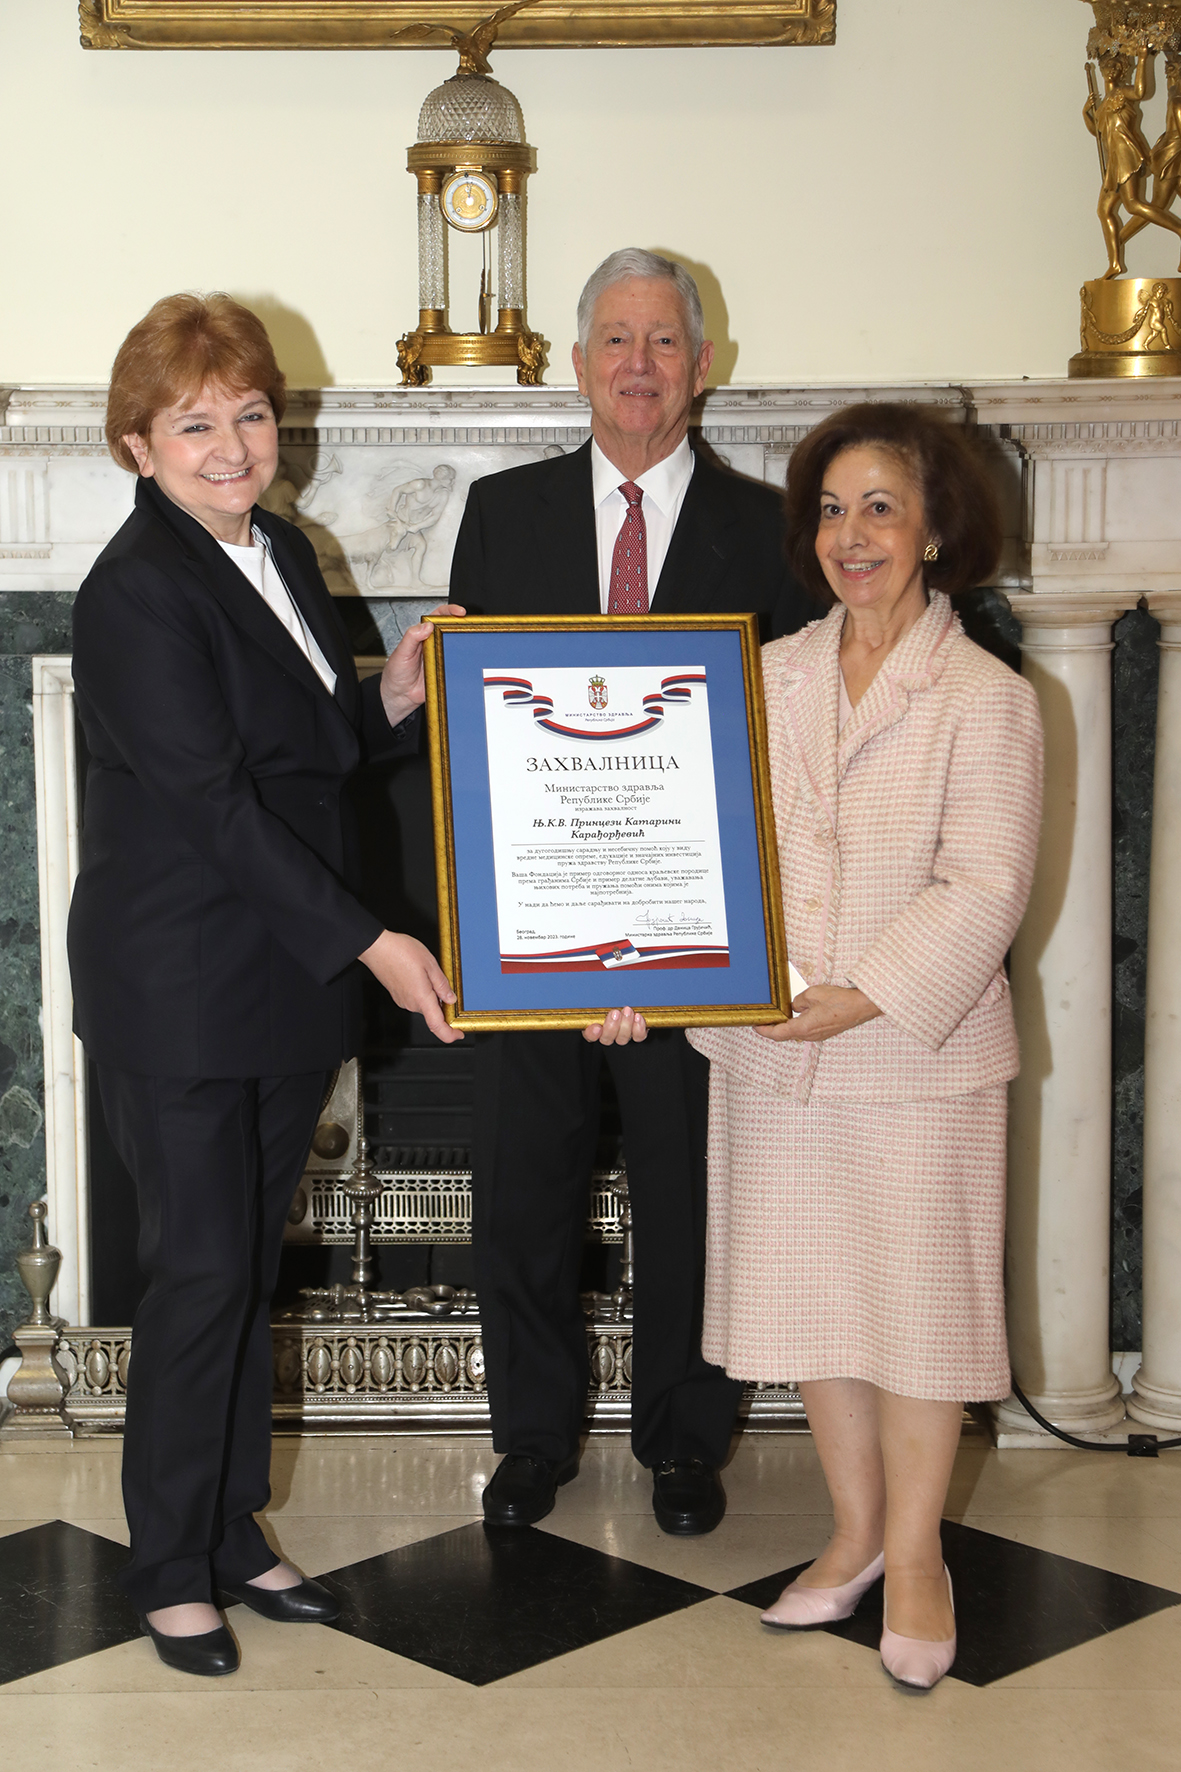 MINISTRY OF HEALTH’S CHARTER OF GRATITUDE FOR CROWN PRINCESS KATHERINE